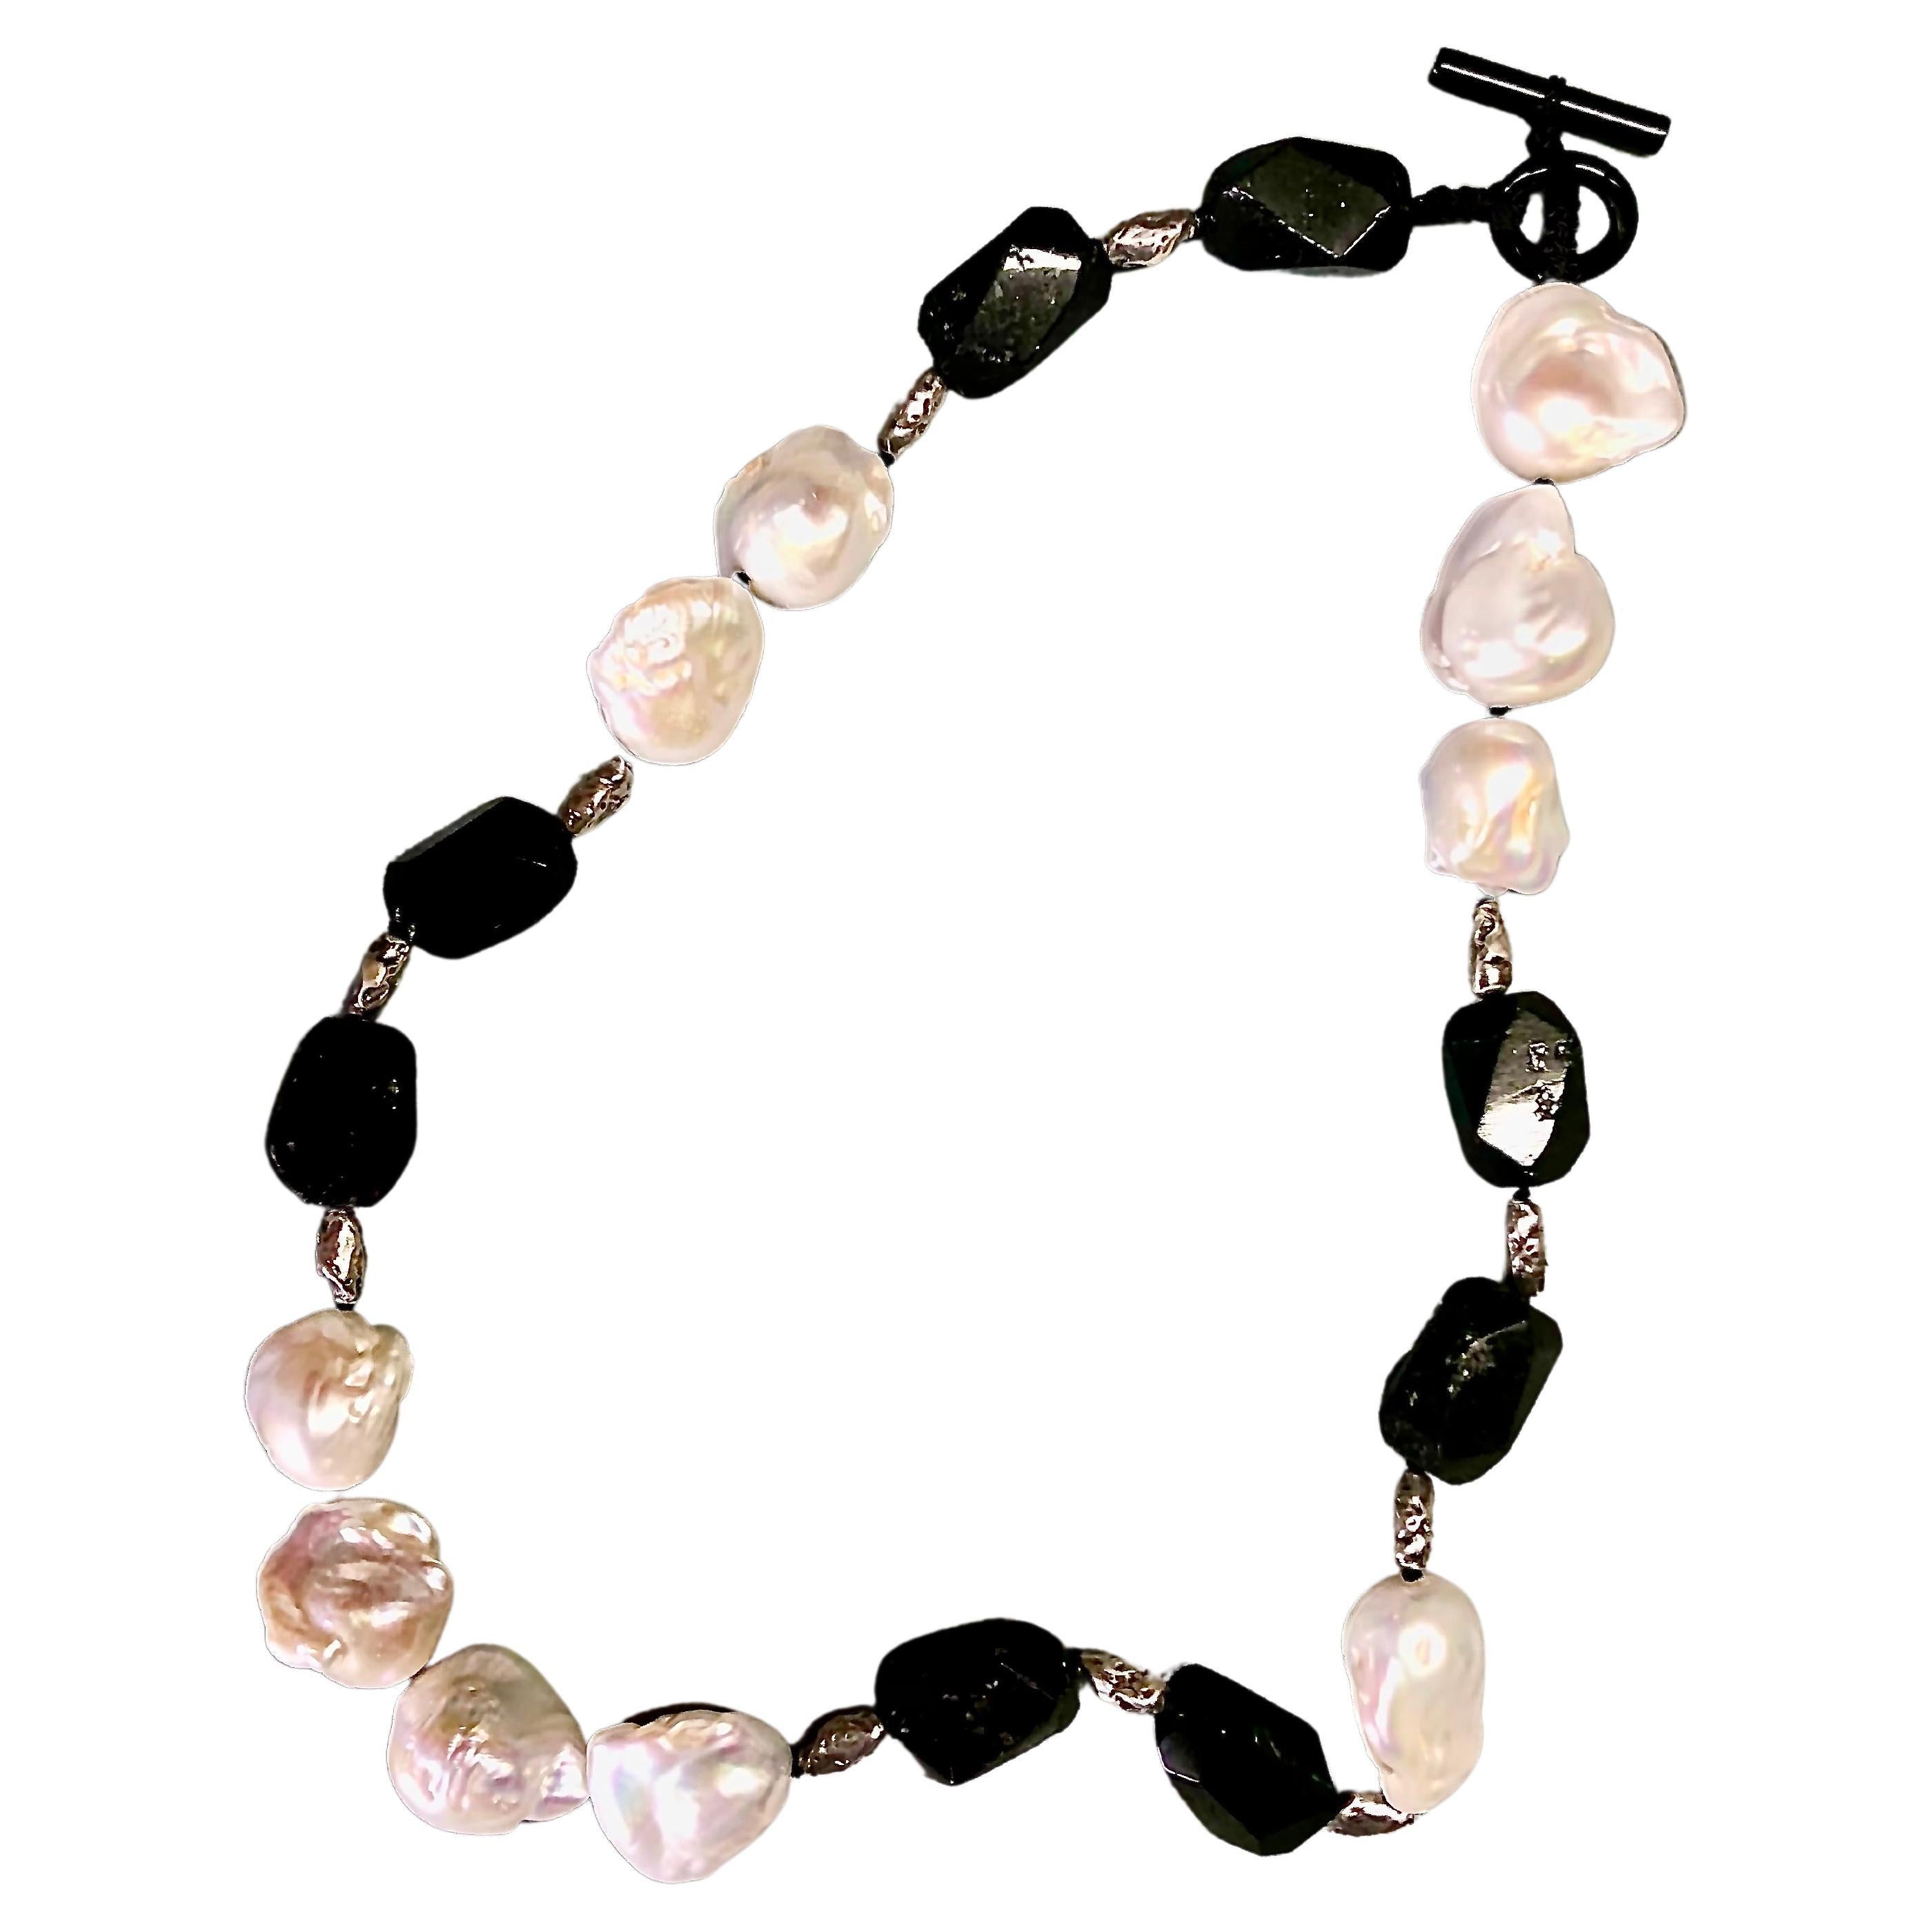 Baroque White Freshwater pearls and tourmaline nugget beads necklace